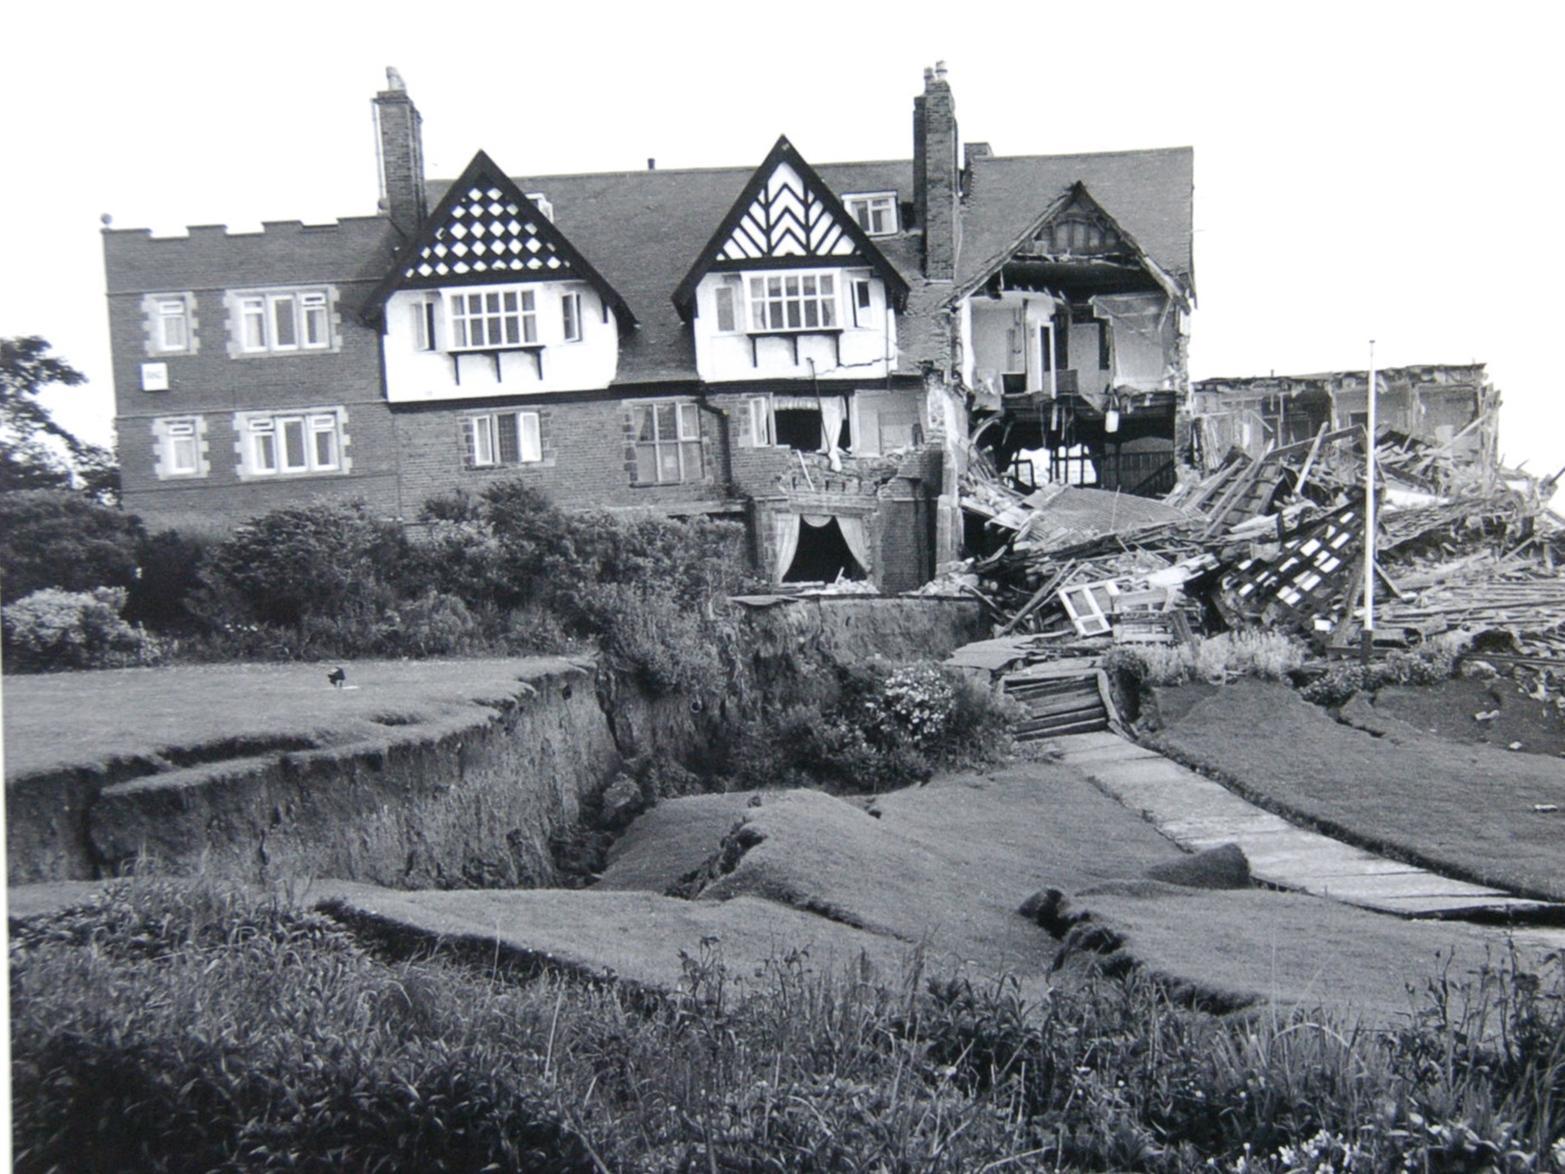 This clifftop hotel made the headlines nationally and internationally when its collapse was captured on live TV in 1993.